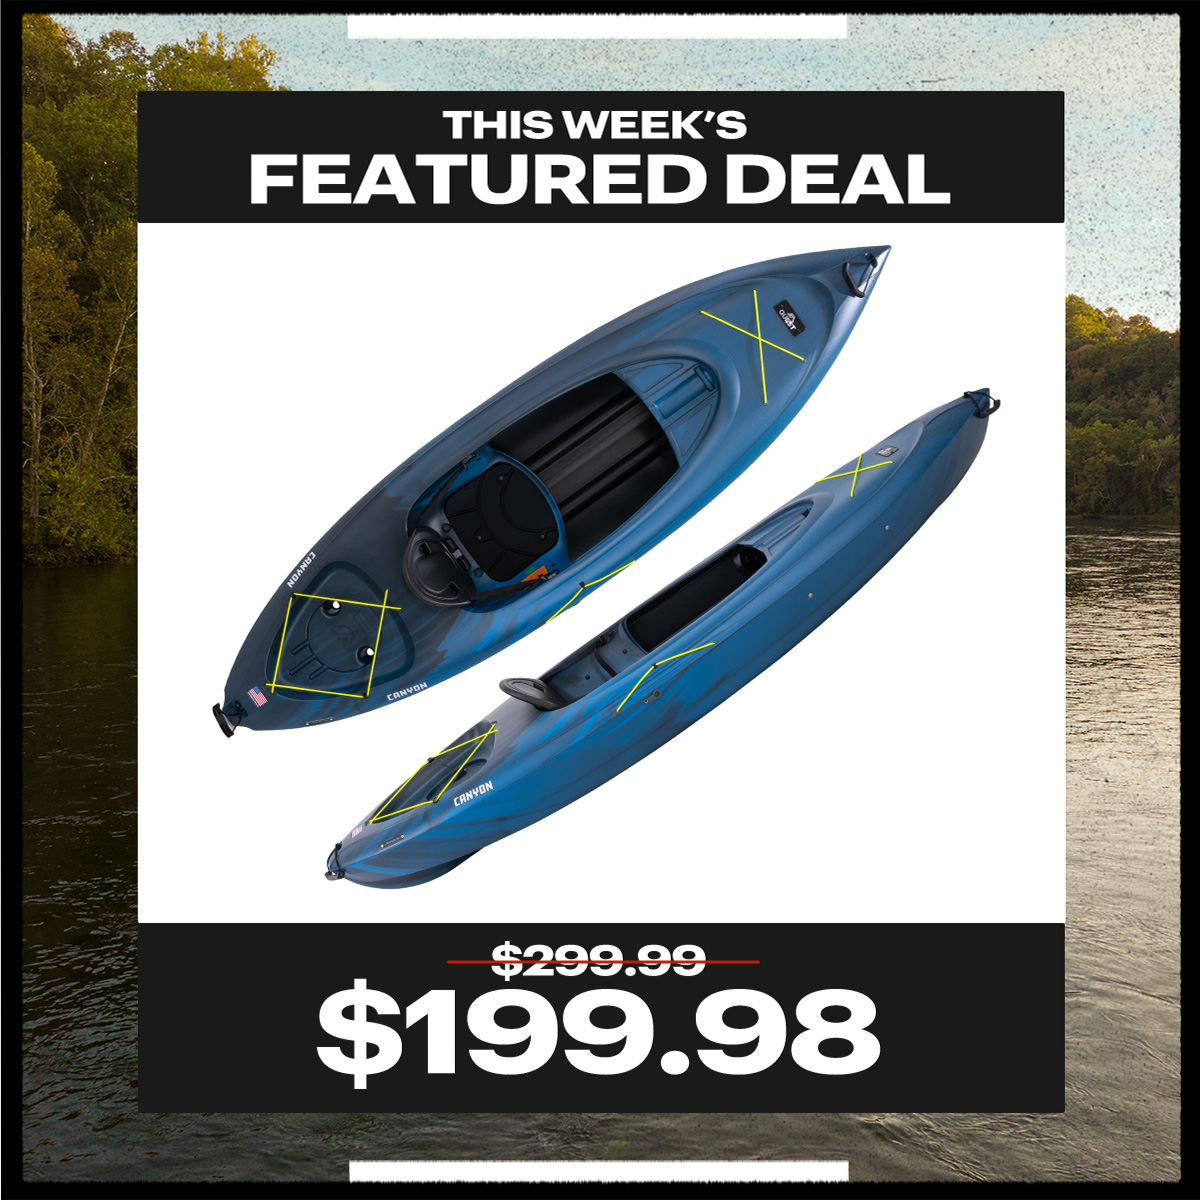 This week's featured deal. Was $299.99. Now $199.98.